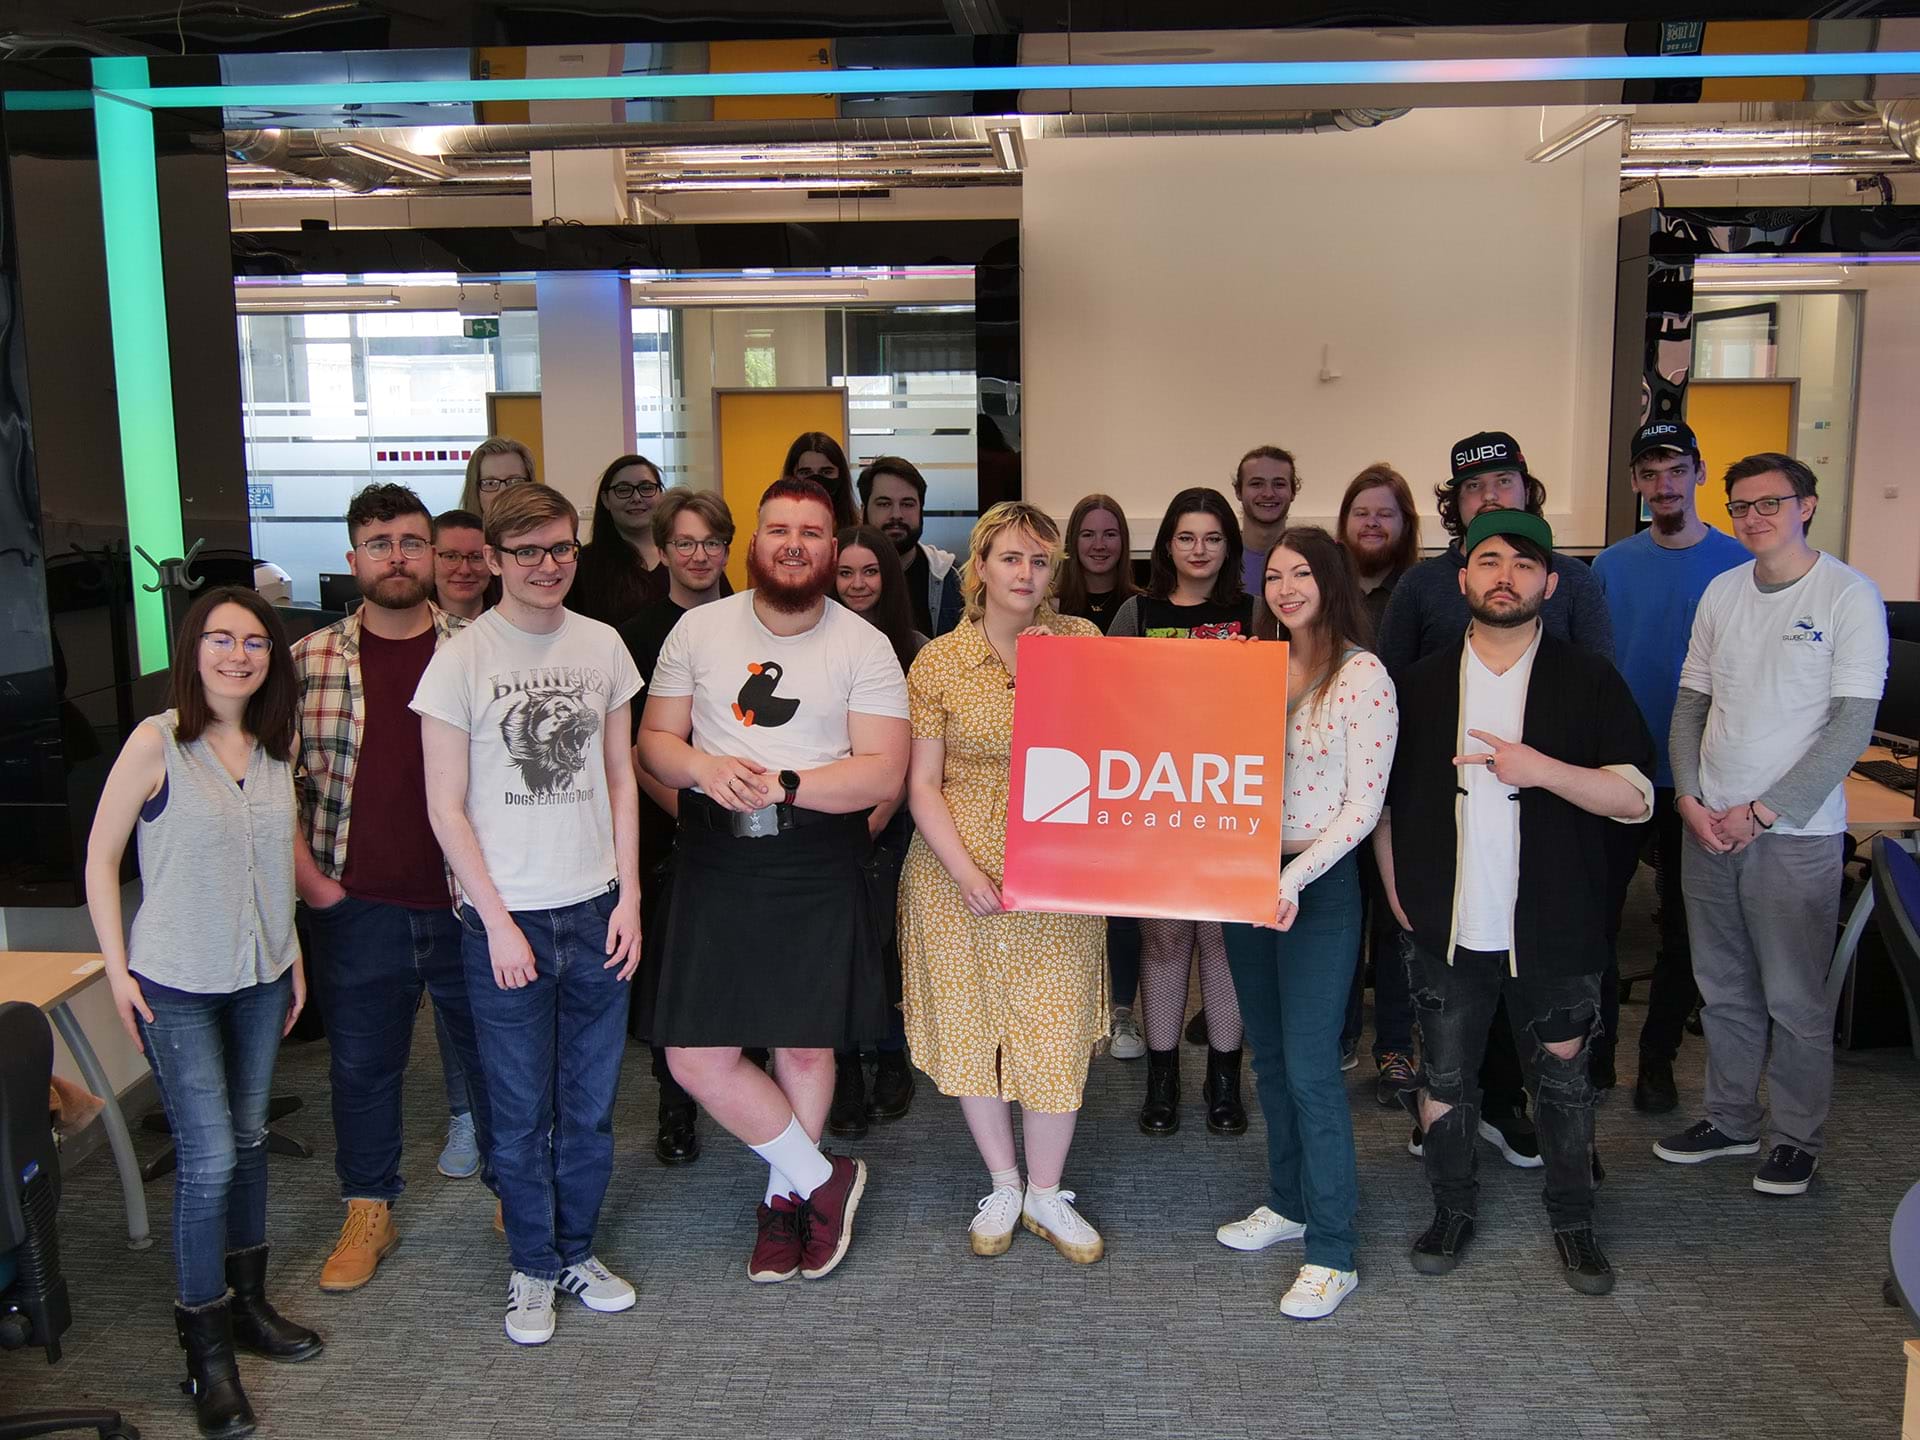 The image shows a group of students in a computer lab holding a Dare Academy sign